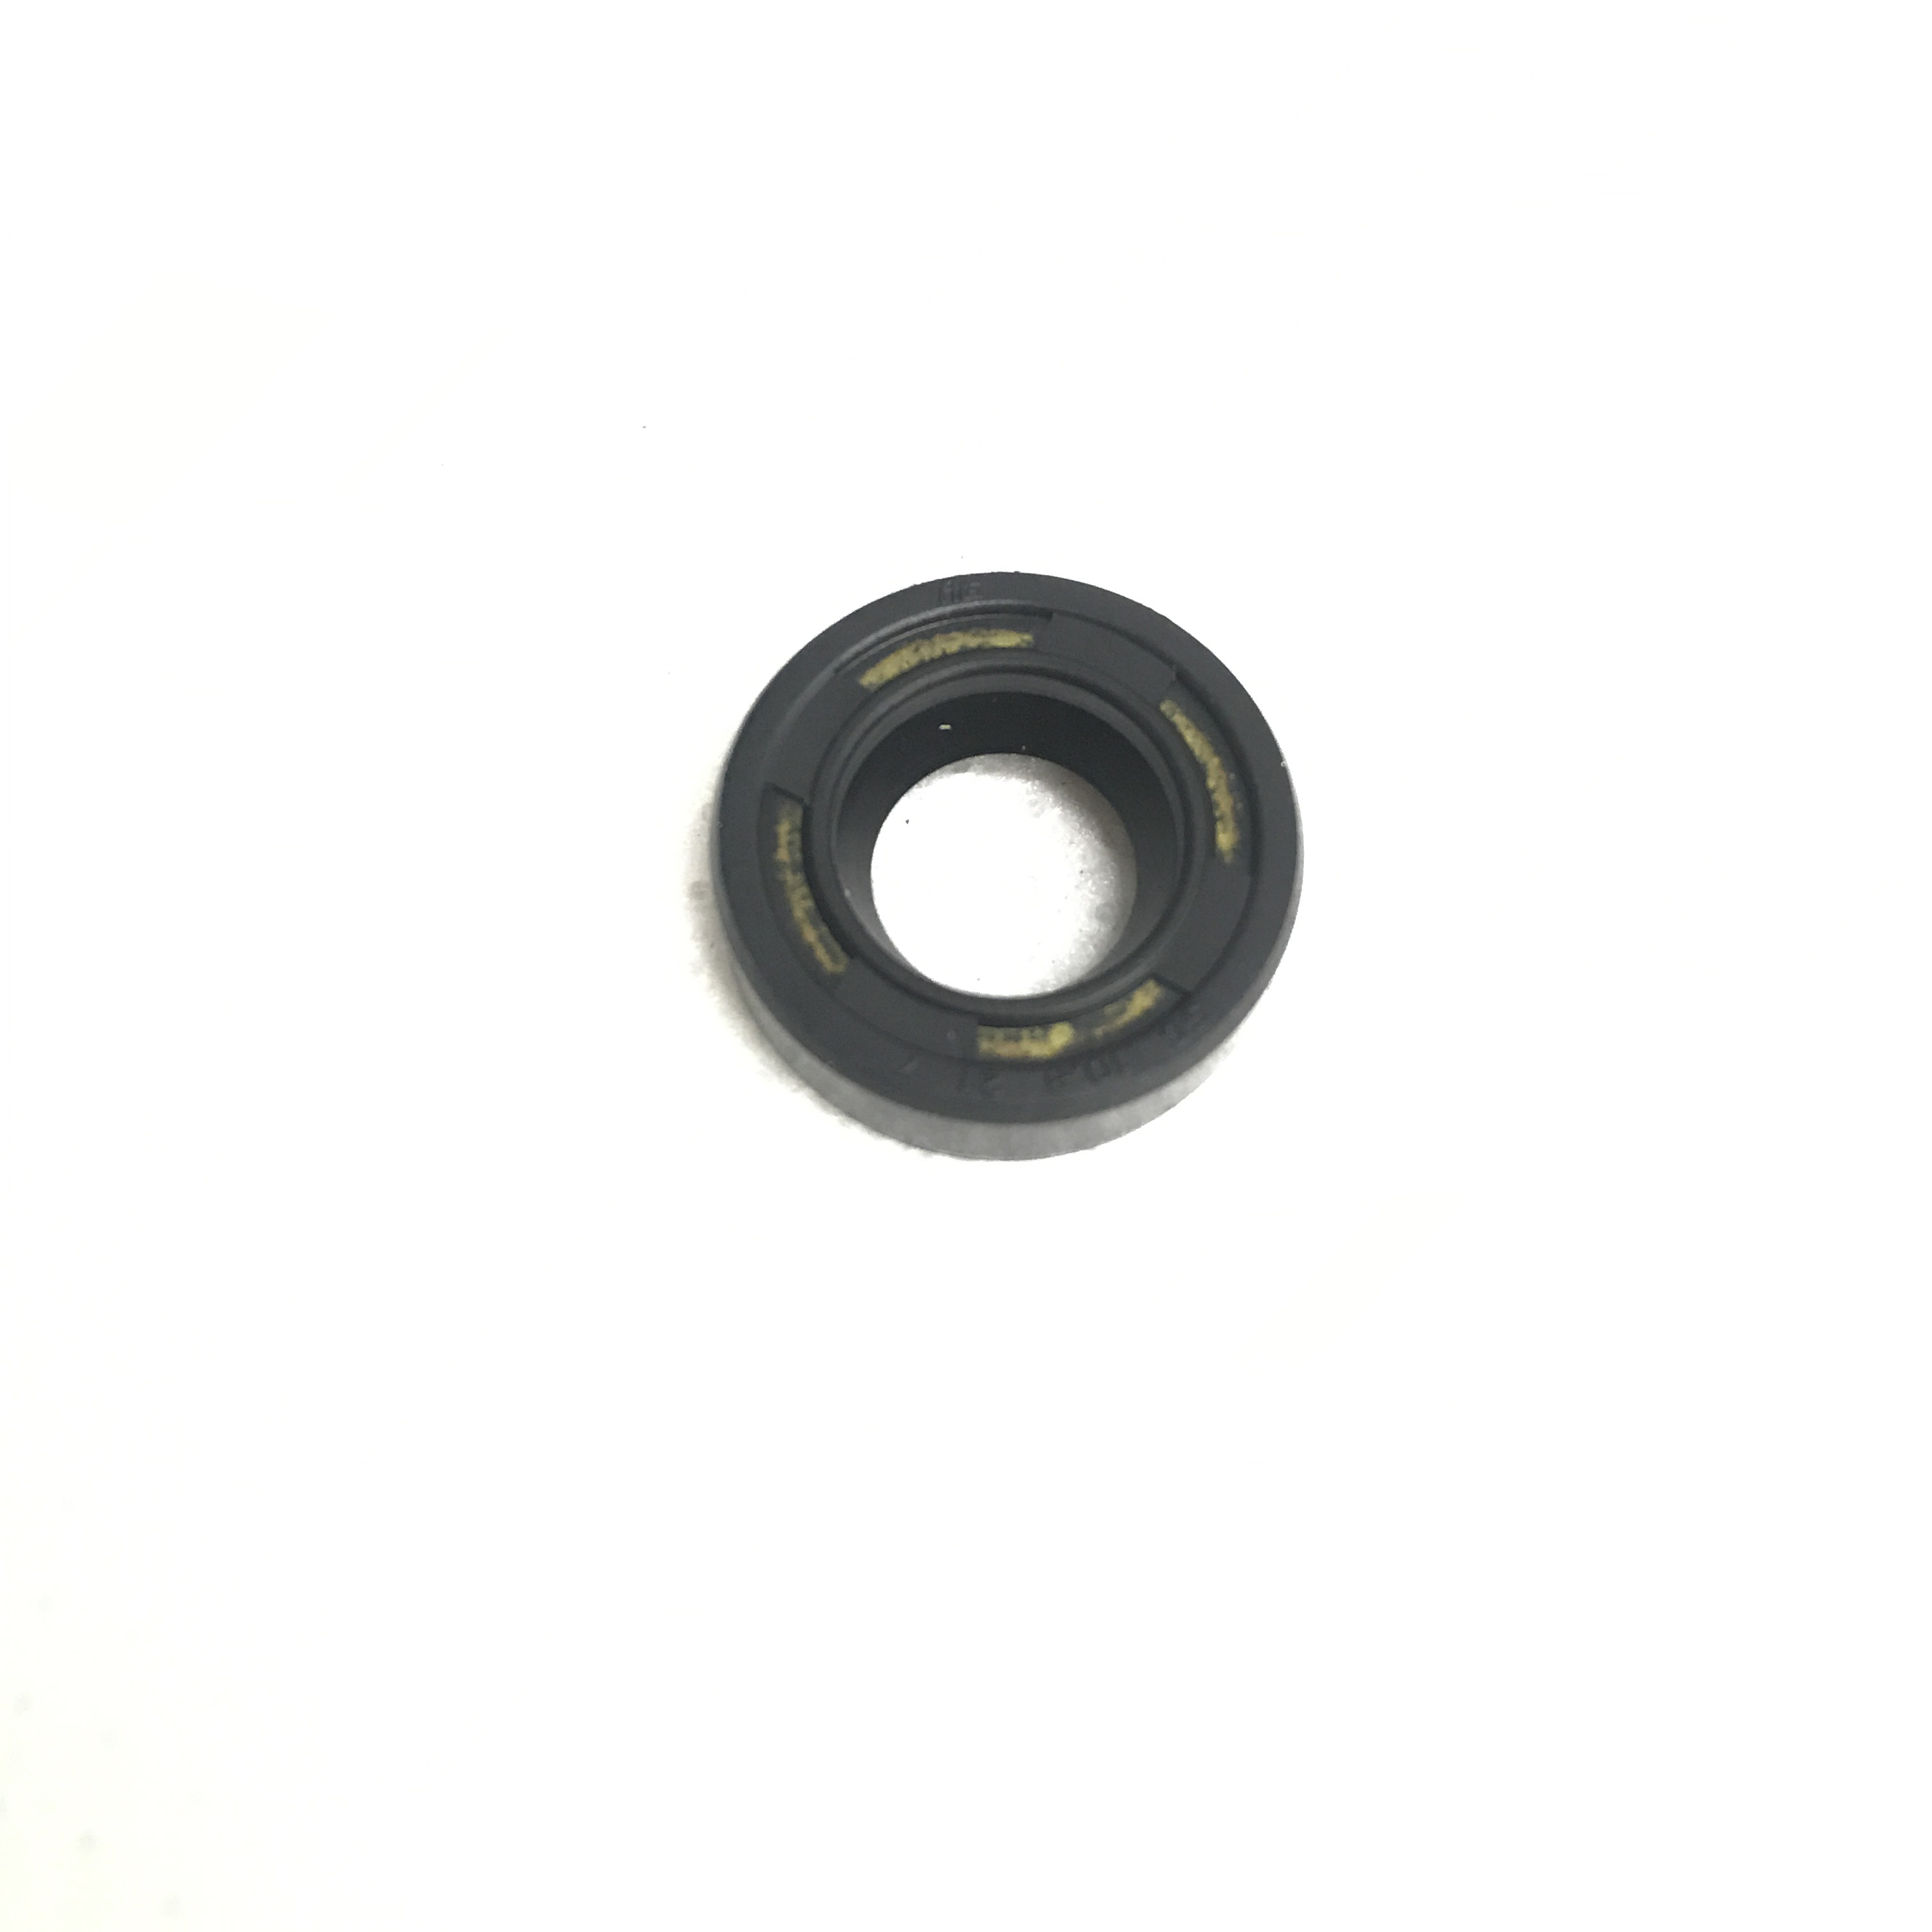 New Oil Seal for MARINE PARTS 4HP 5HP 93101-11M25 93101-10M14 93101-11M14 93101-10M25